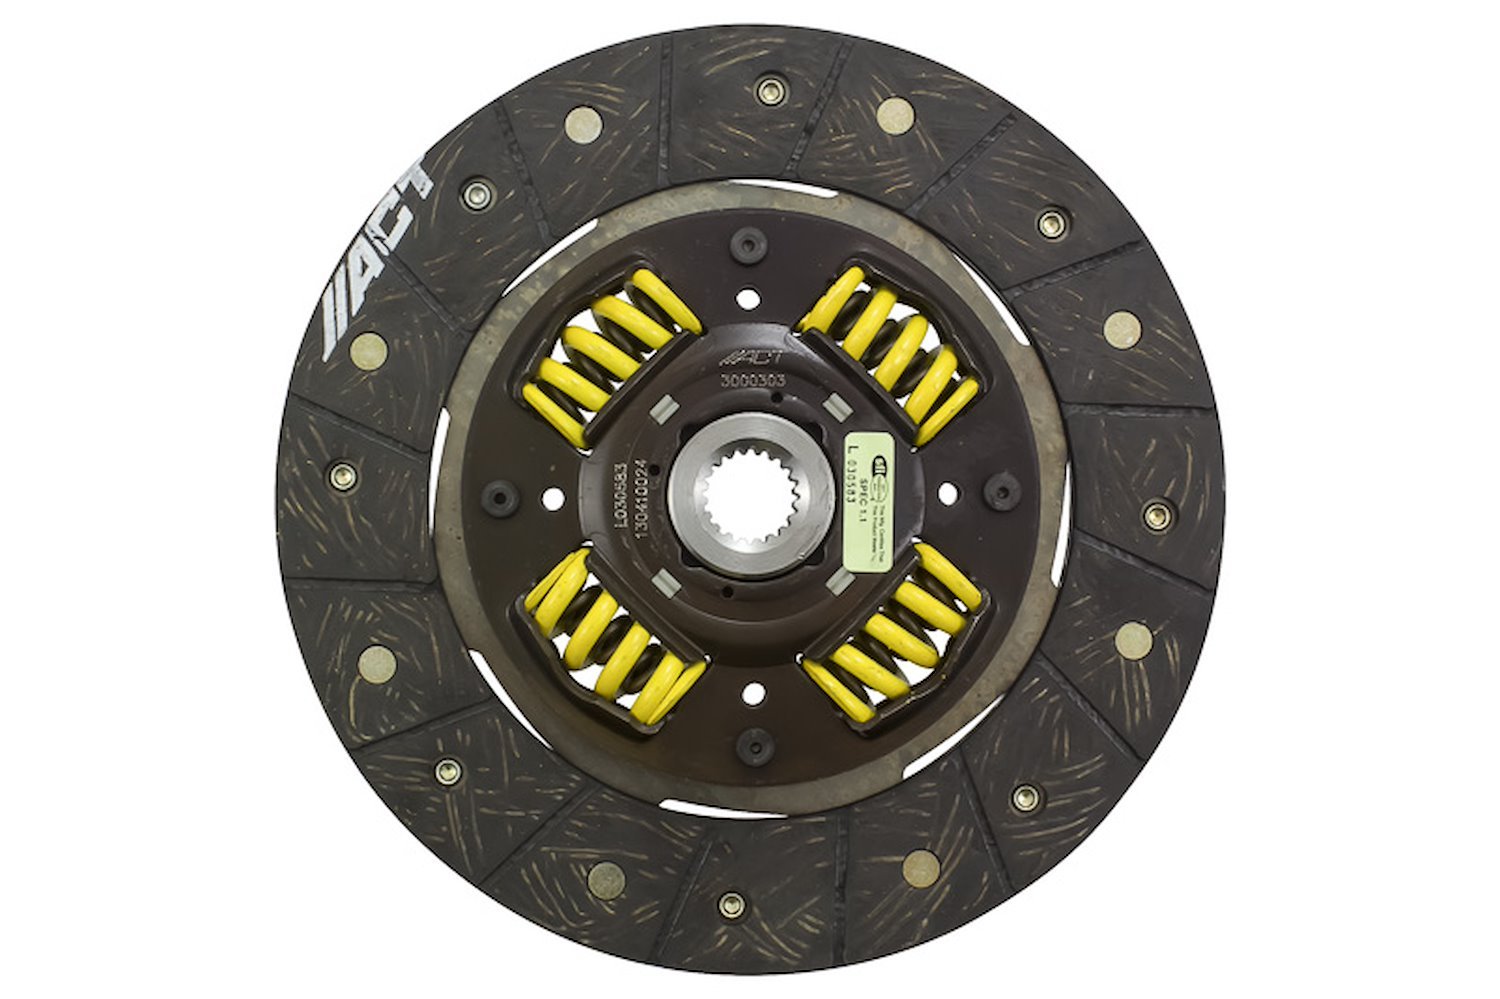 Performance Street Sprung Disc Transmission Clutch Friction Plate Fits Select Chrysler/Dodge/Eagle/Mitsubishi/Plymouth